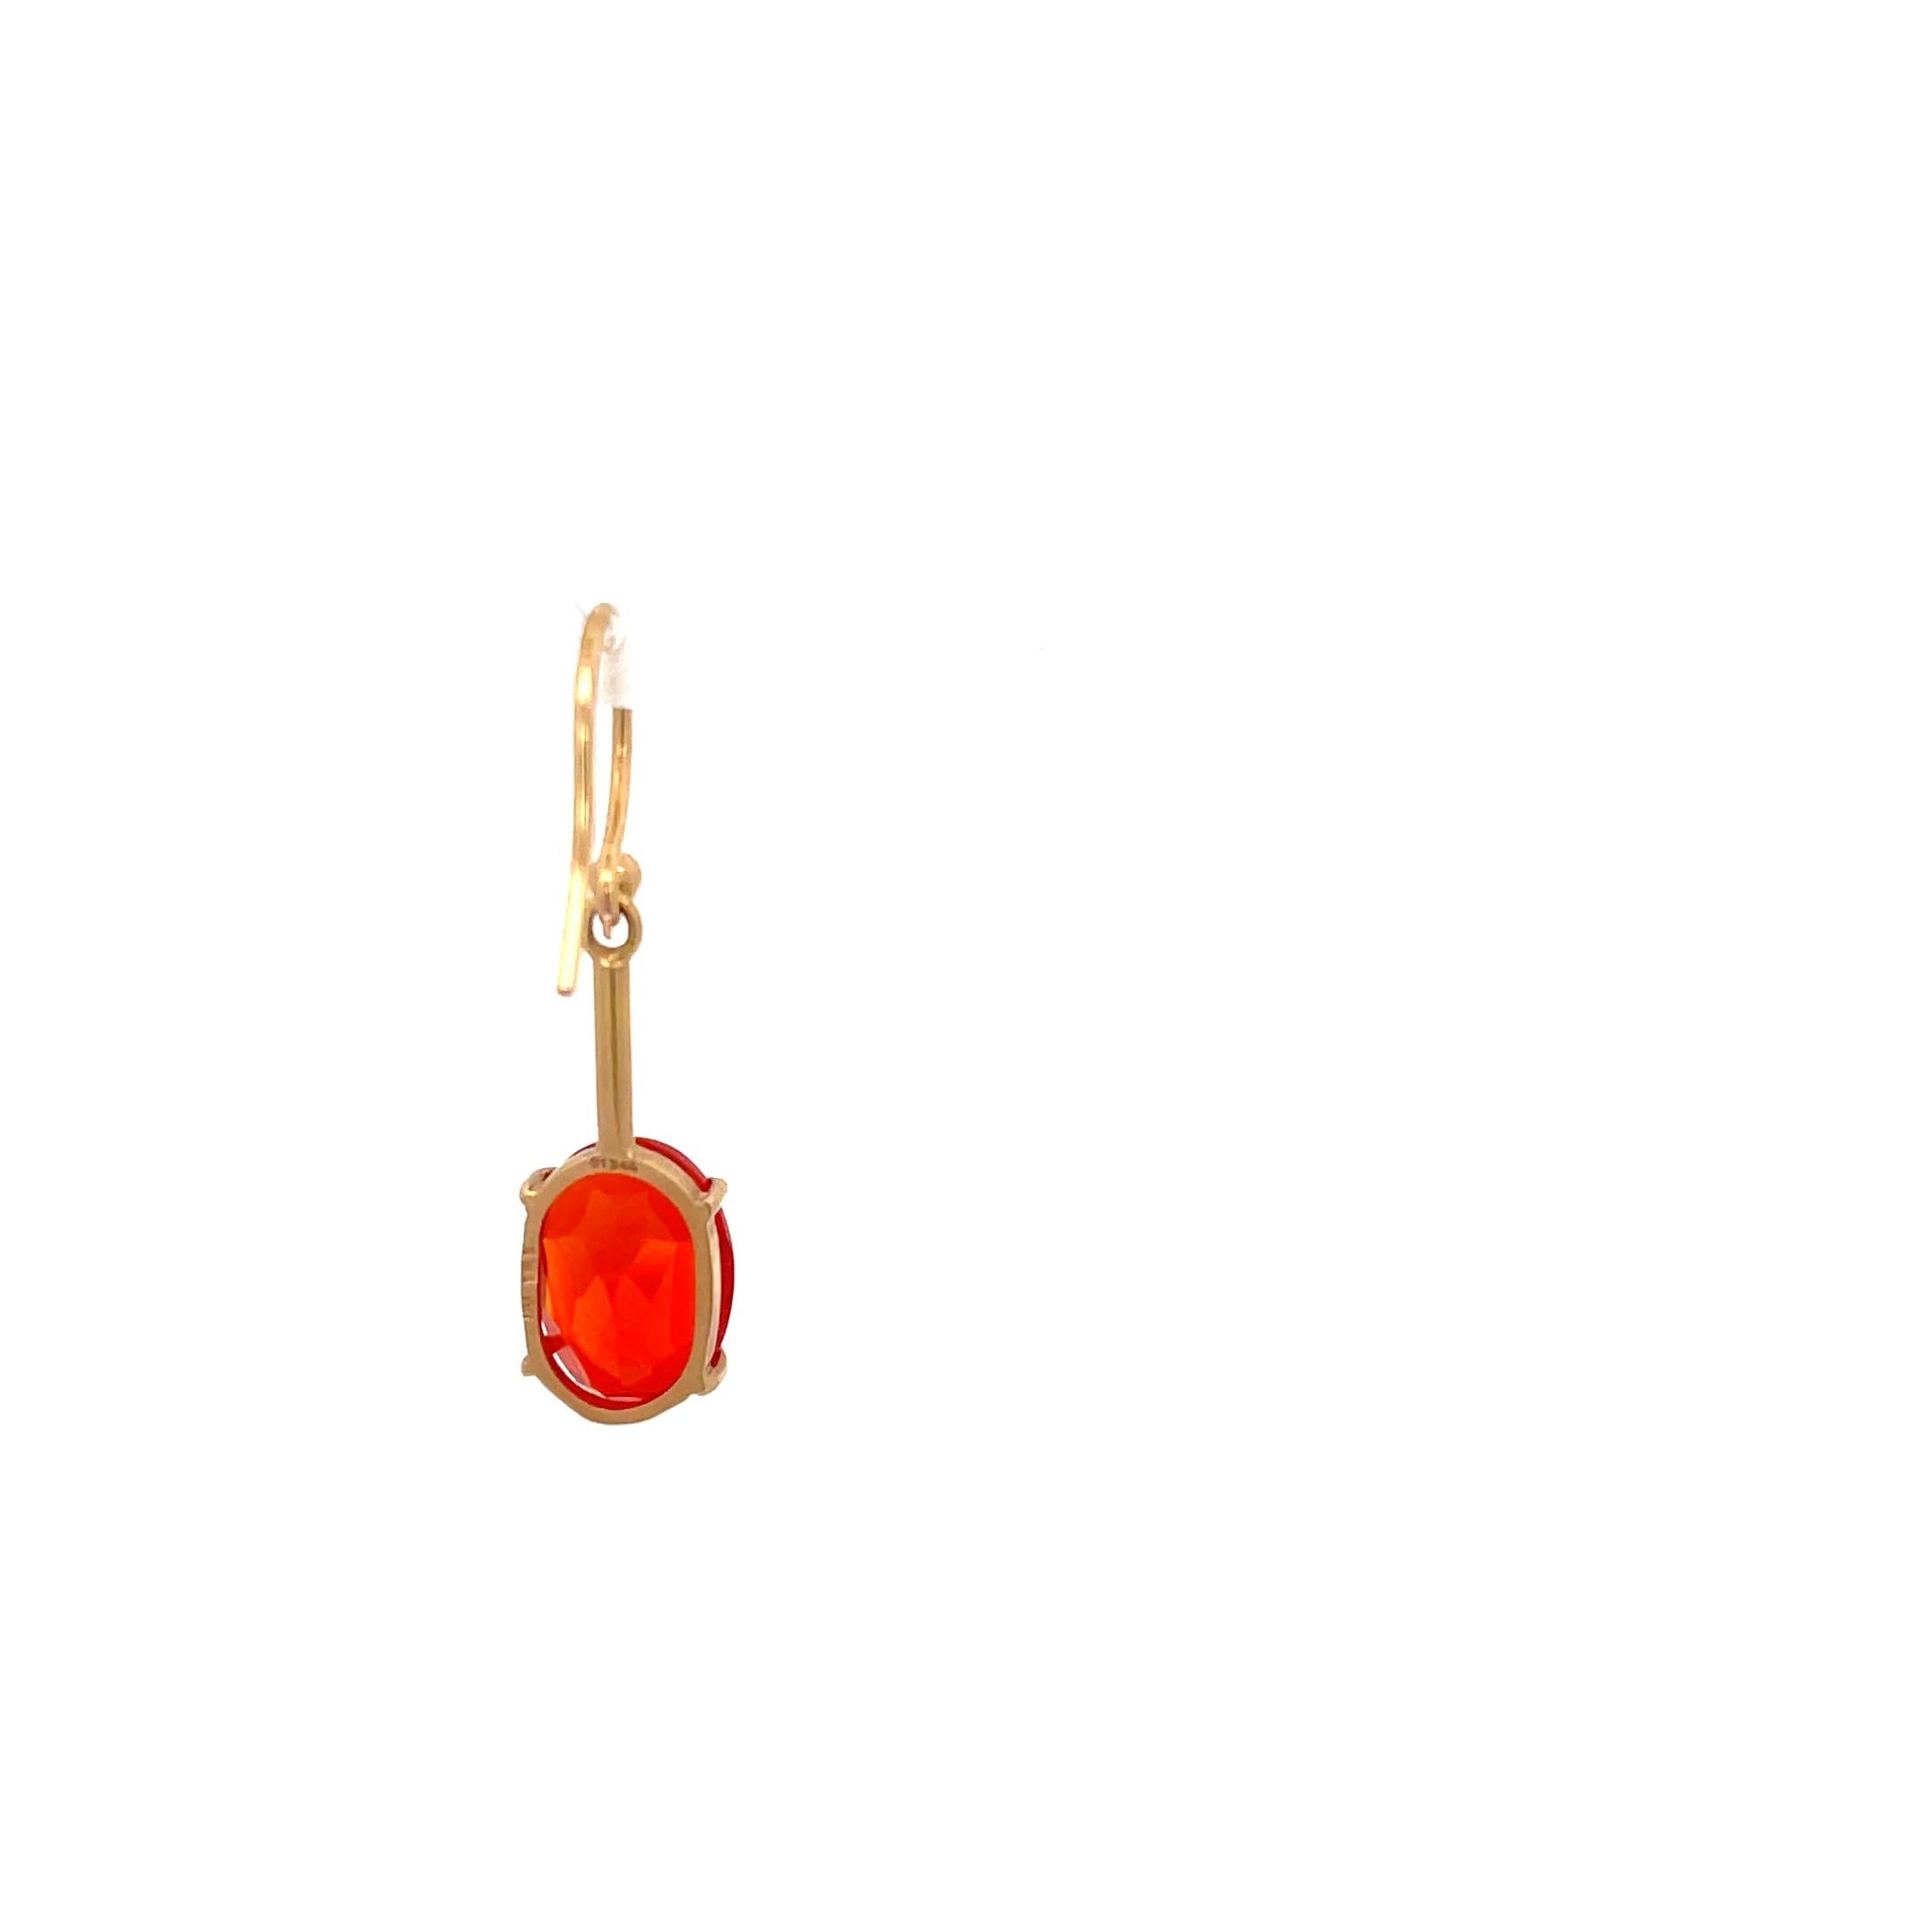 Irene Neuwirth Fire Opal Single Earring 18K Rose Gold In Excellent Condition For Sale In Dallas, TX